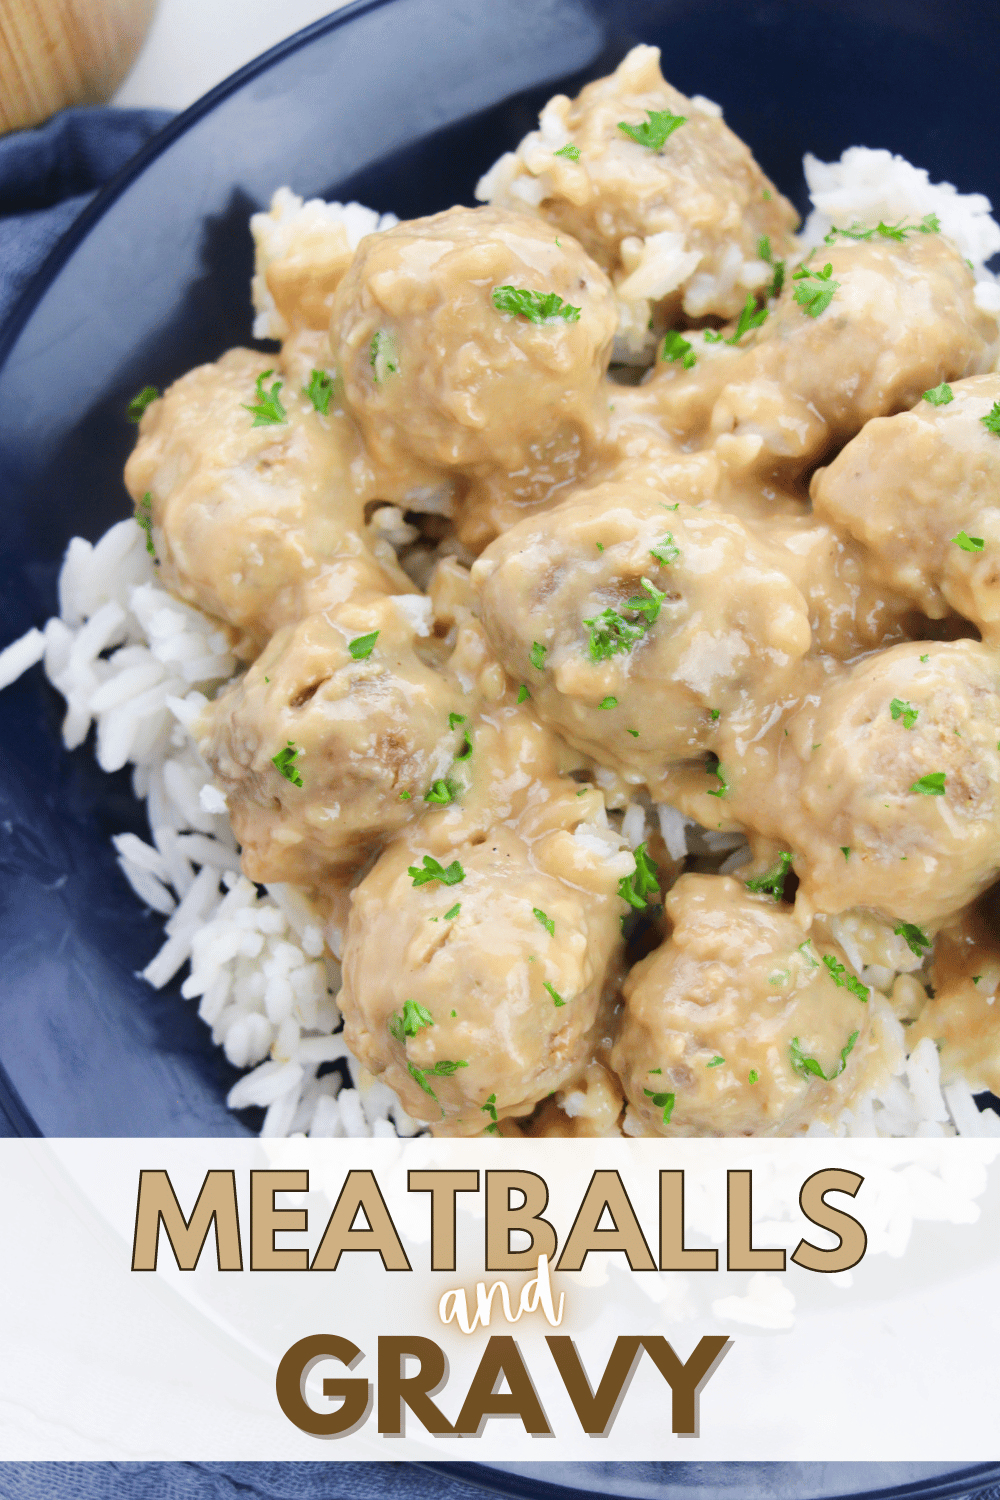 This Meatballs and Gravy recipe is a classic comfort food that makes the perfect weeknight meal. You'll fall in love after the first bite. #meatballsandgravy #comfortfood #meatballs via @wondermomwannab